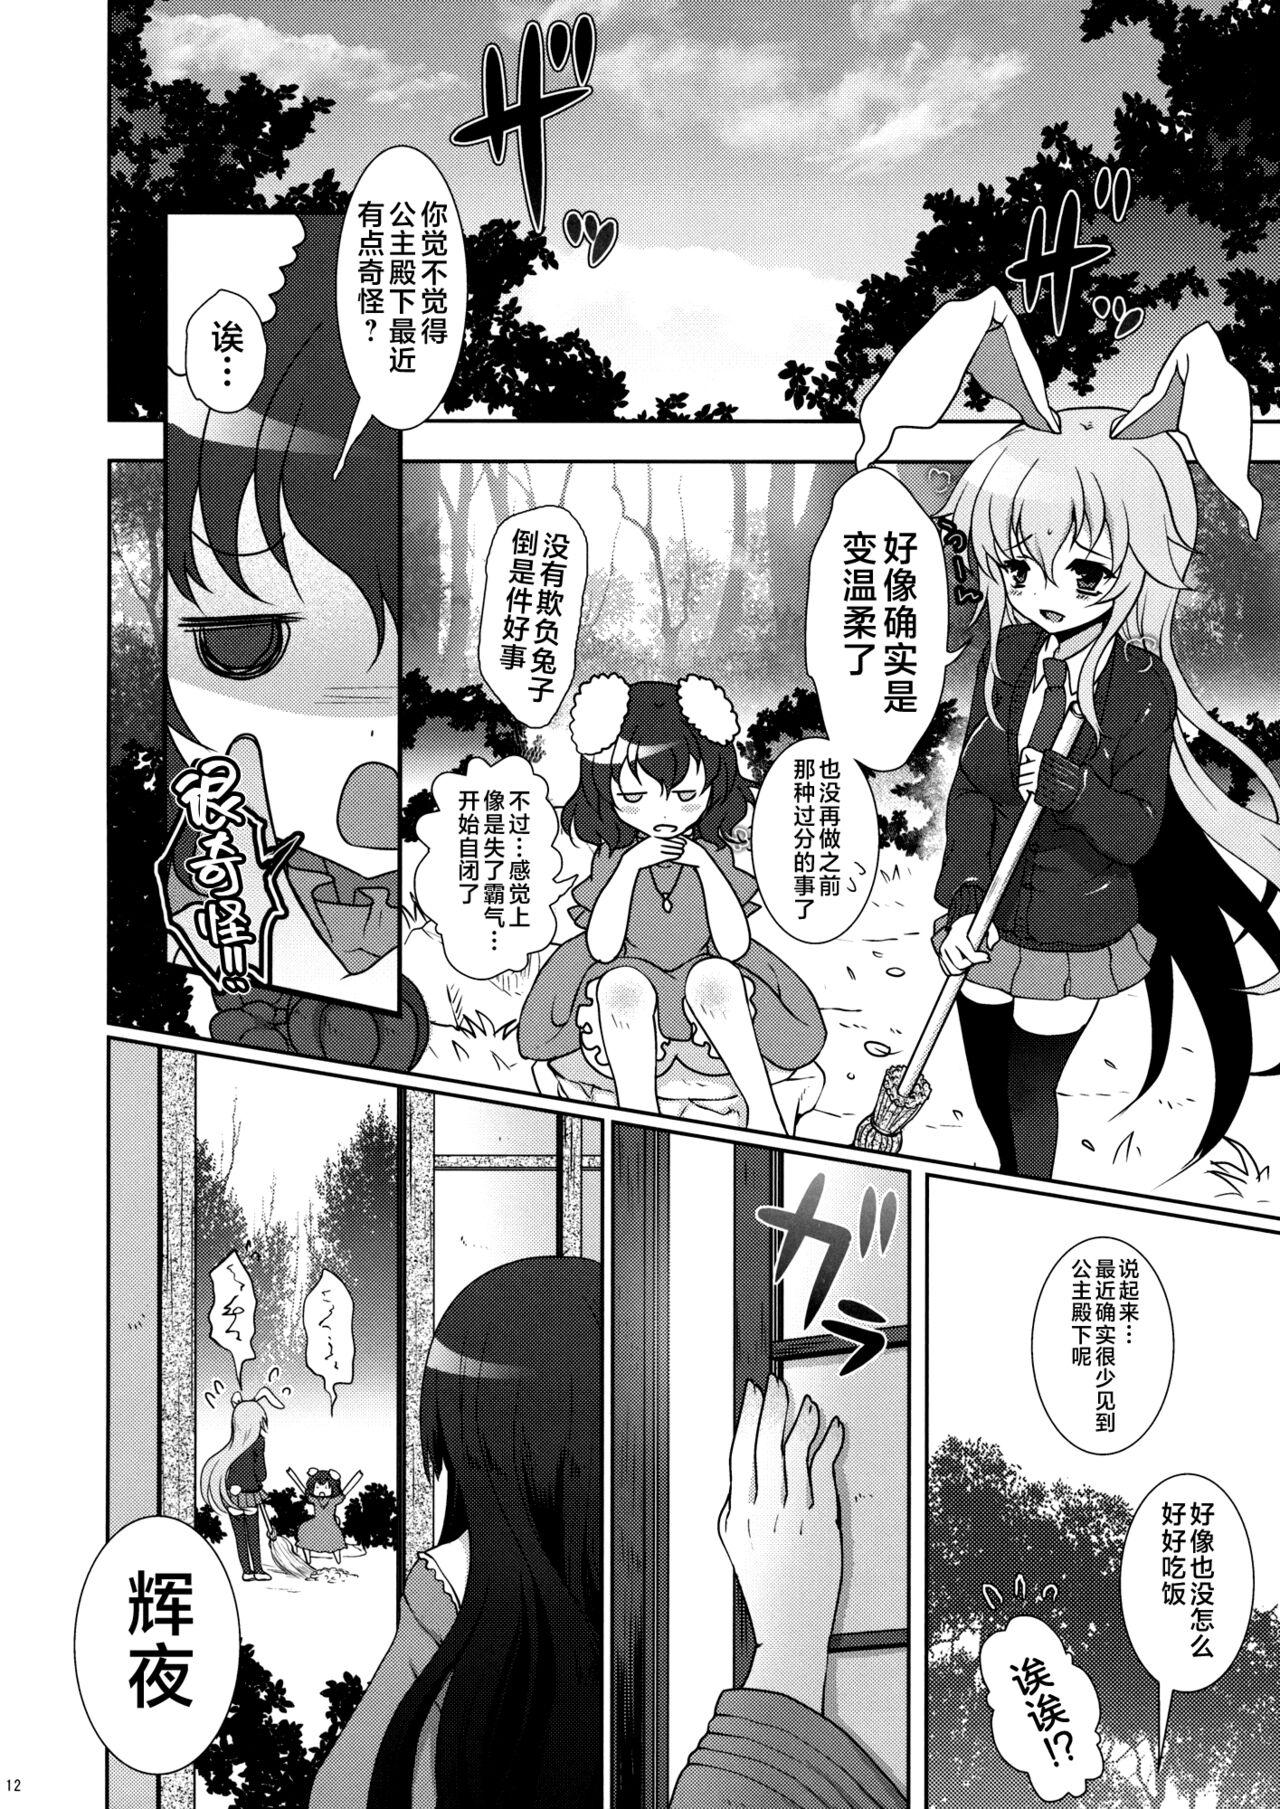 Vibrator Scapegoat Act: 2 - Touhou project Daring - Page 12